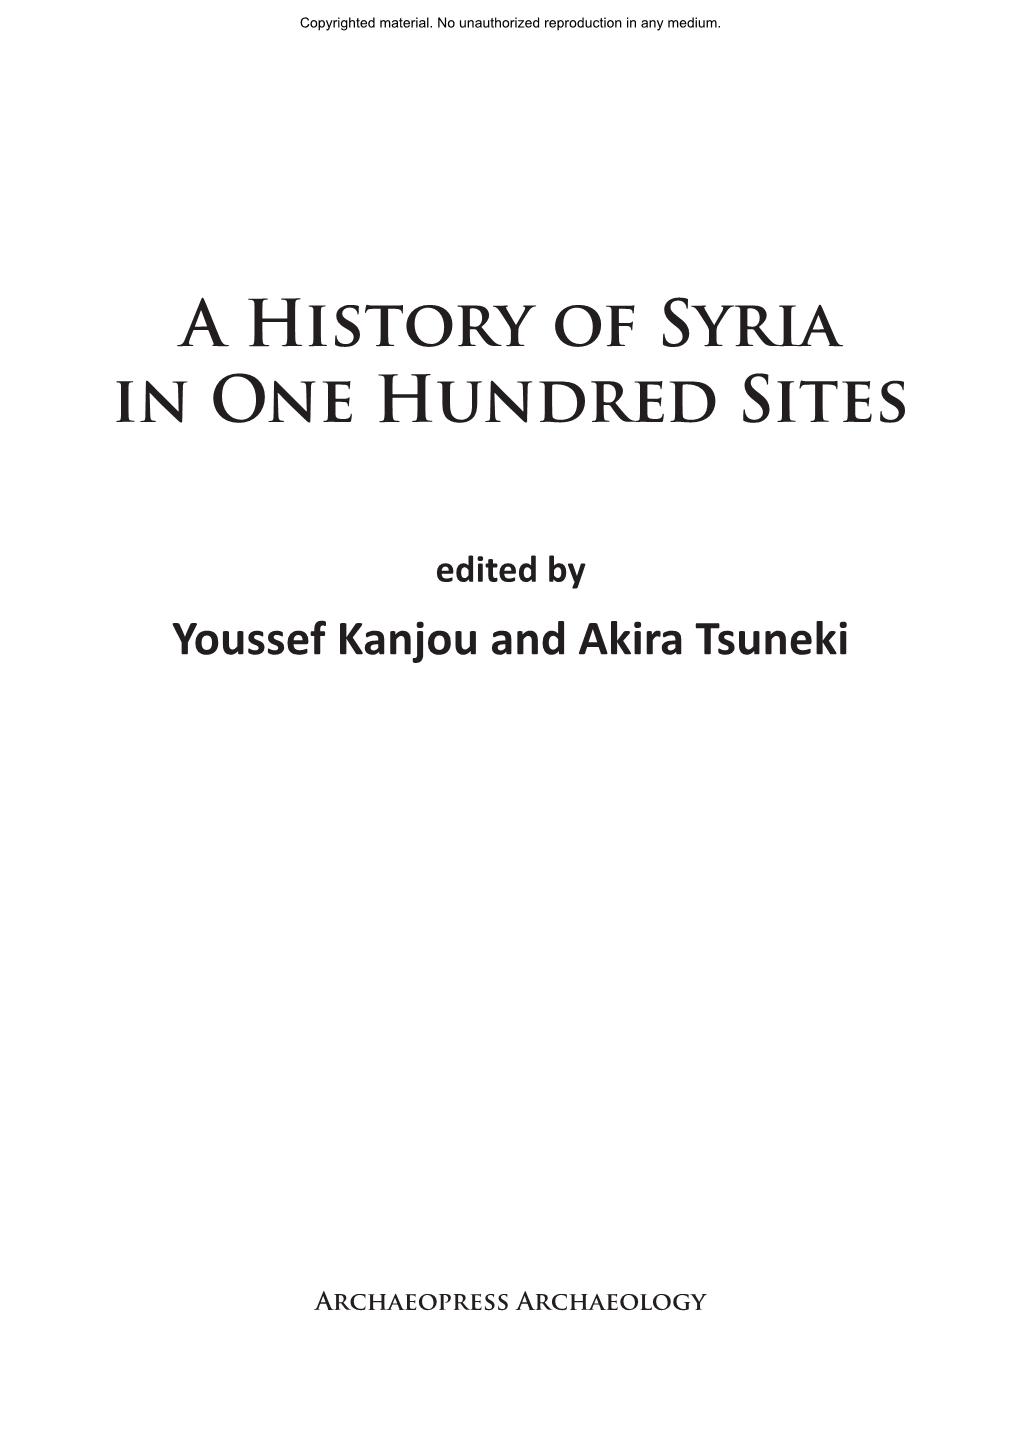 A History of Syria in One Hundred Sites